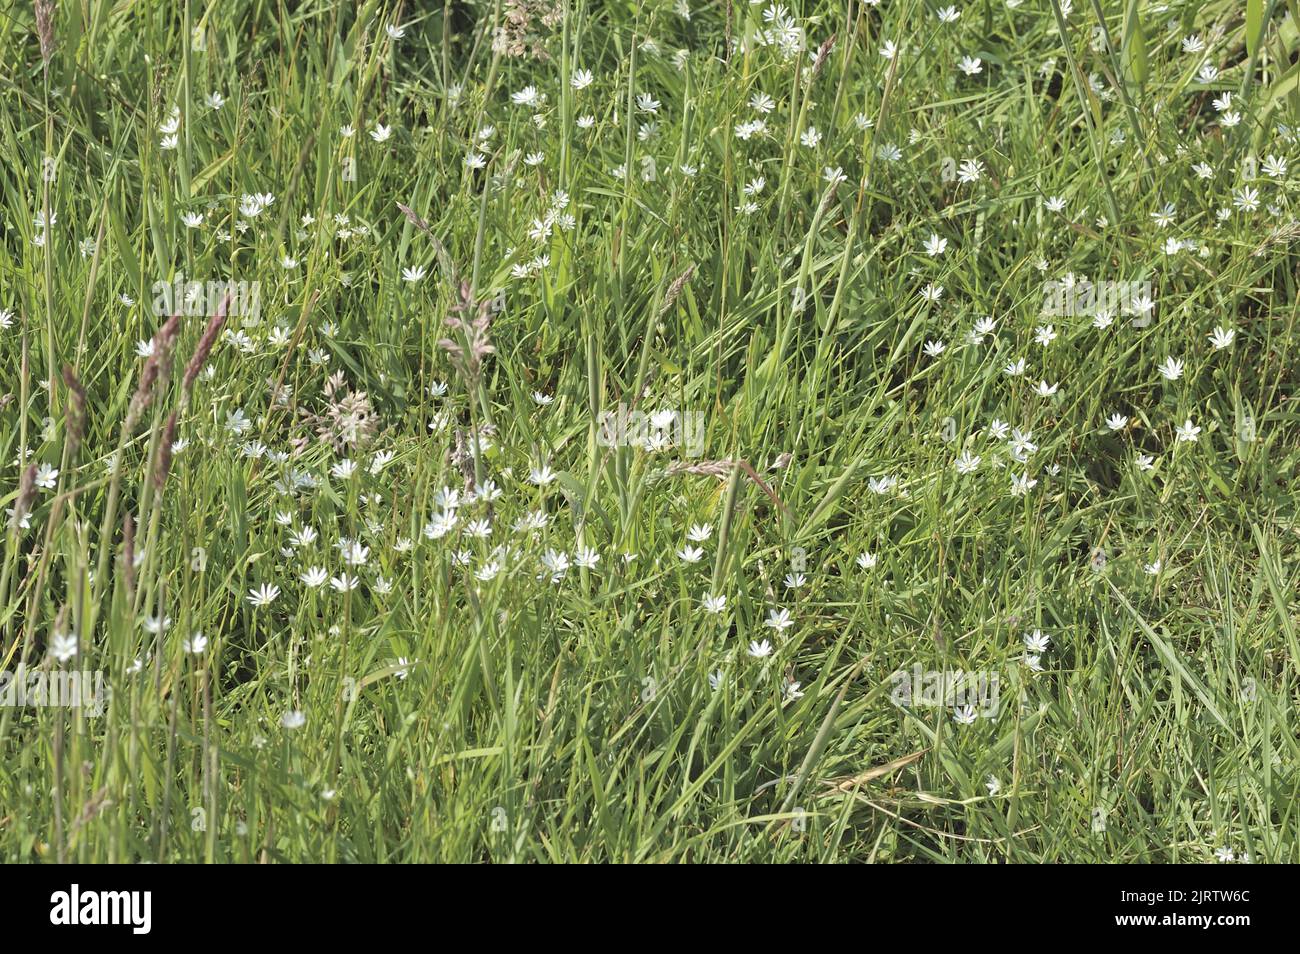 Common starwort - Lesser stichwort - Grass-leaved stichtwort - Grass-like starwort (Stellaria graminea) f lowering in a wild meadow at spring Belgium Stock Photo